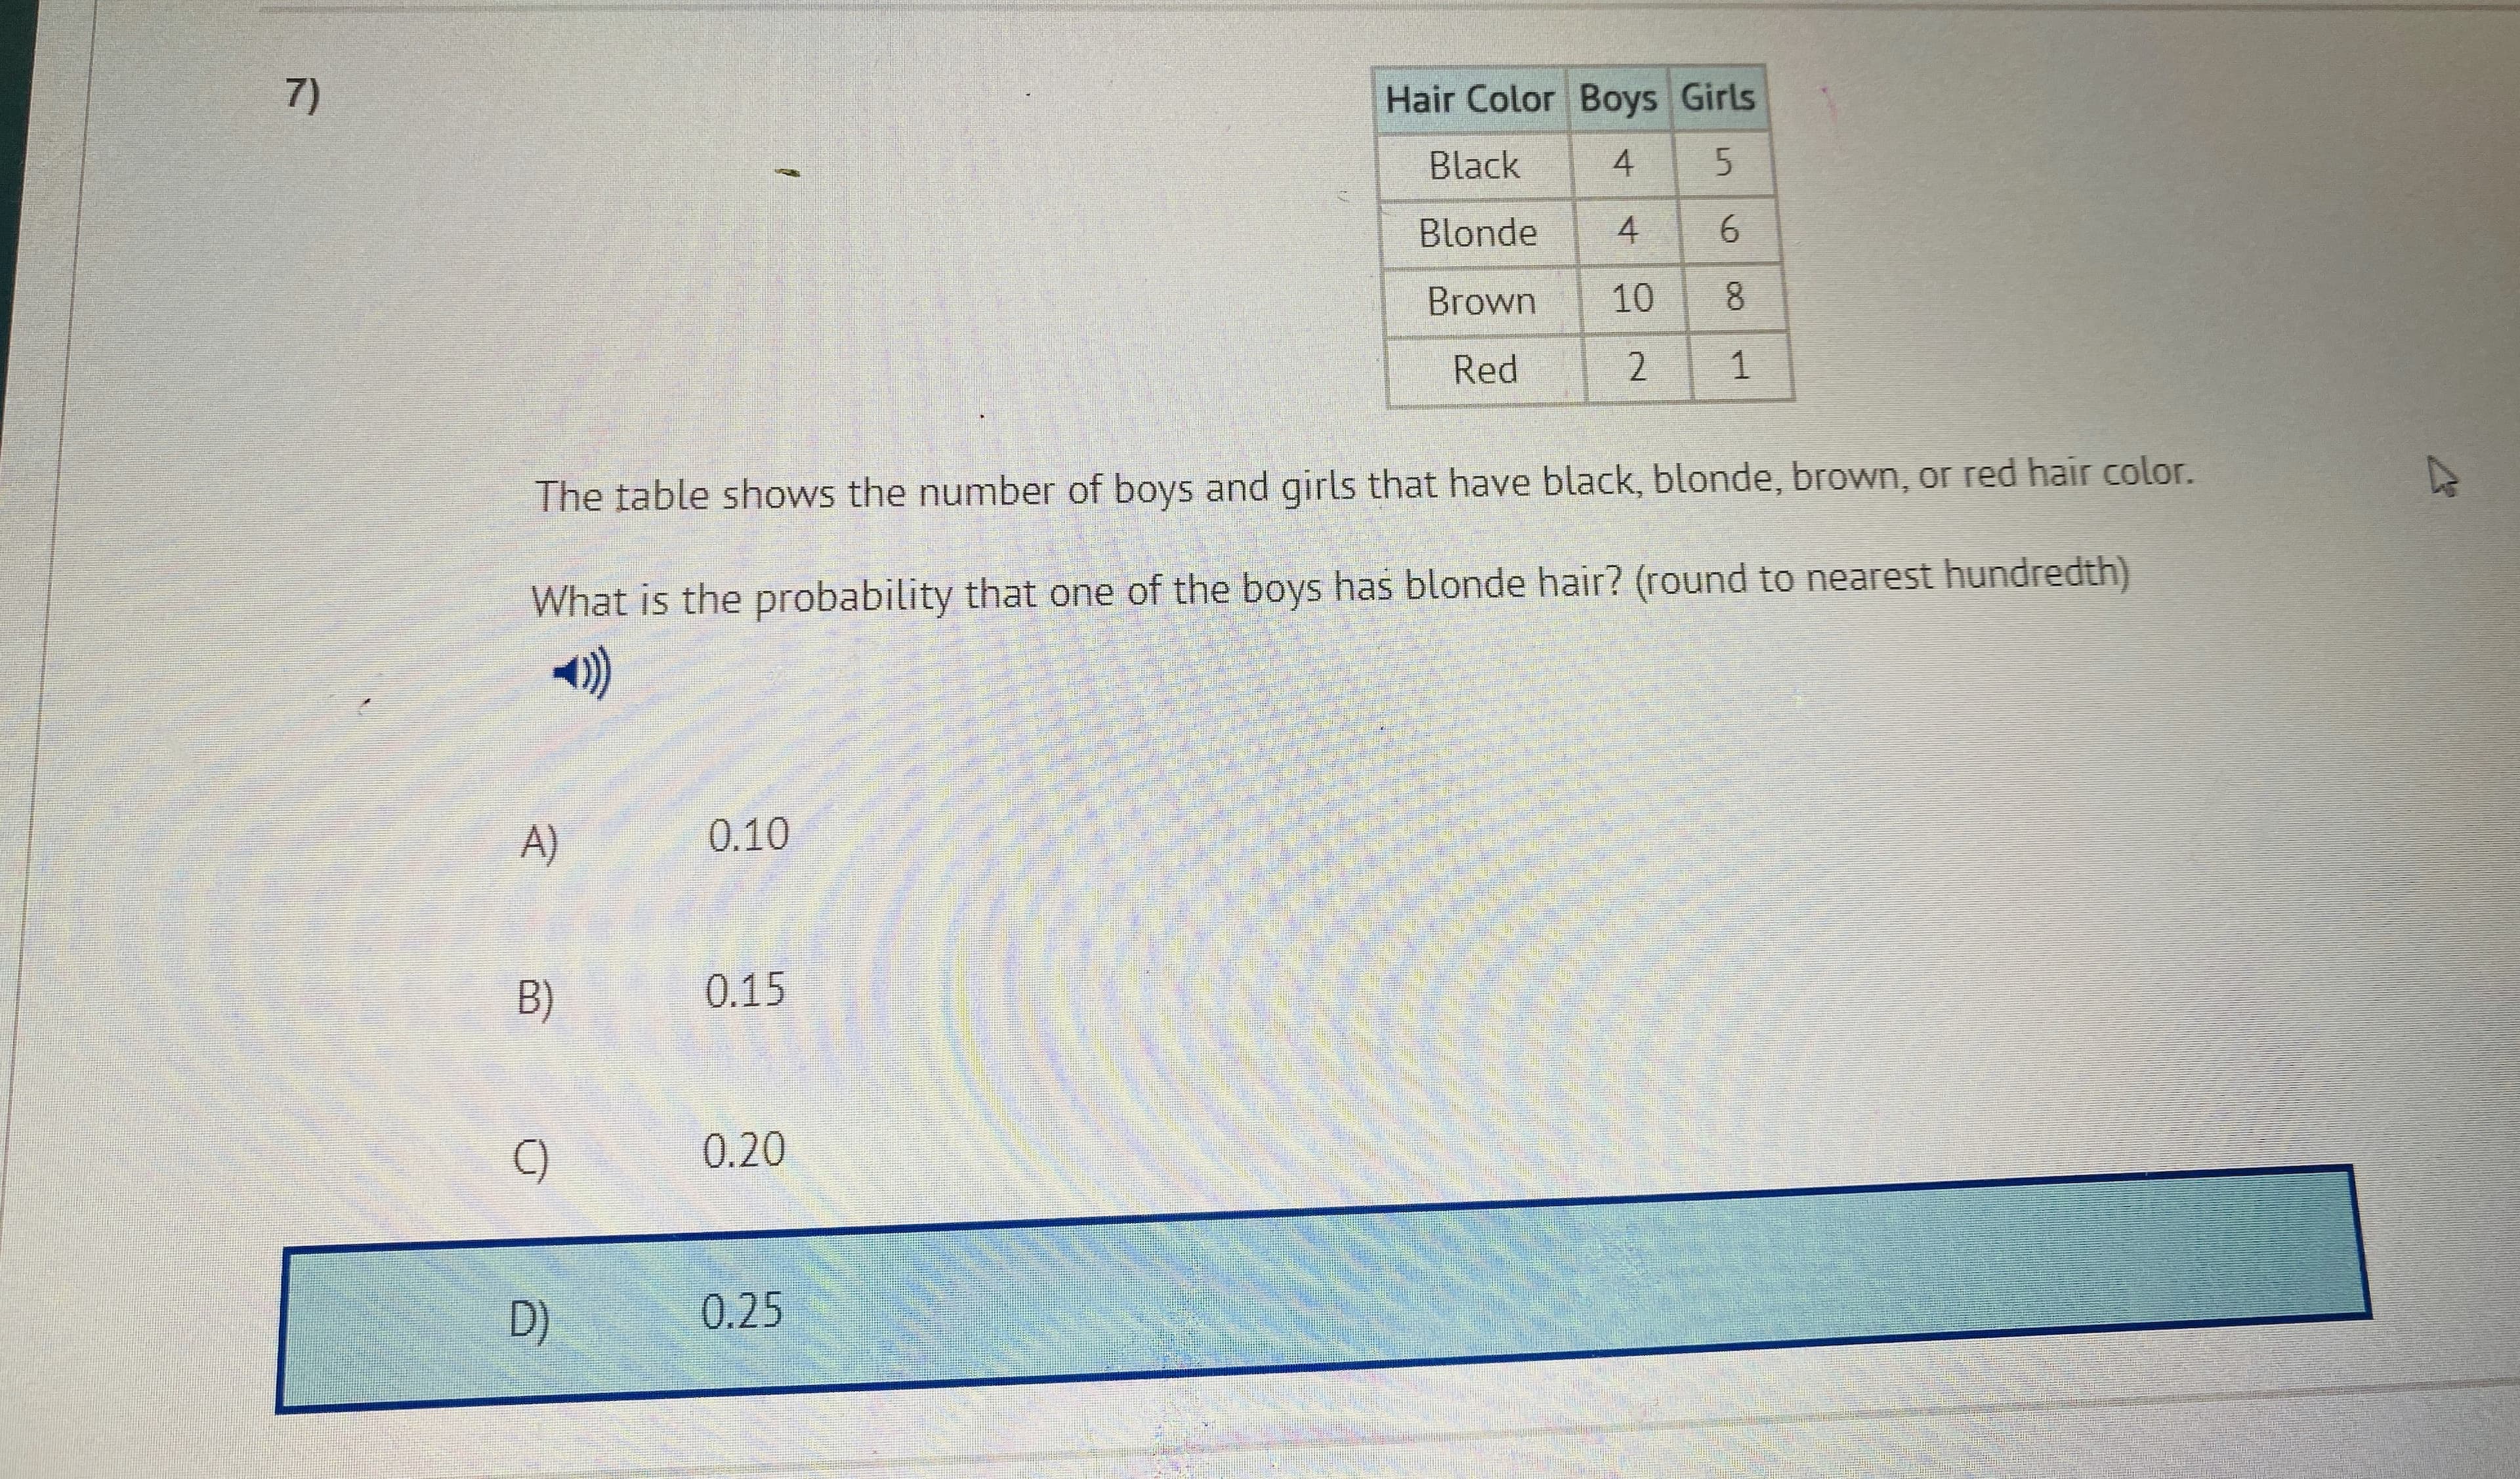 The table shows the number of boys and girls that have black, blonde, brown, or red hair color.
What is the probability that one of the boys has blonde hair? (round to nearest hundredth)
